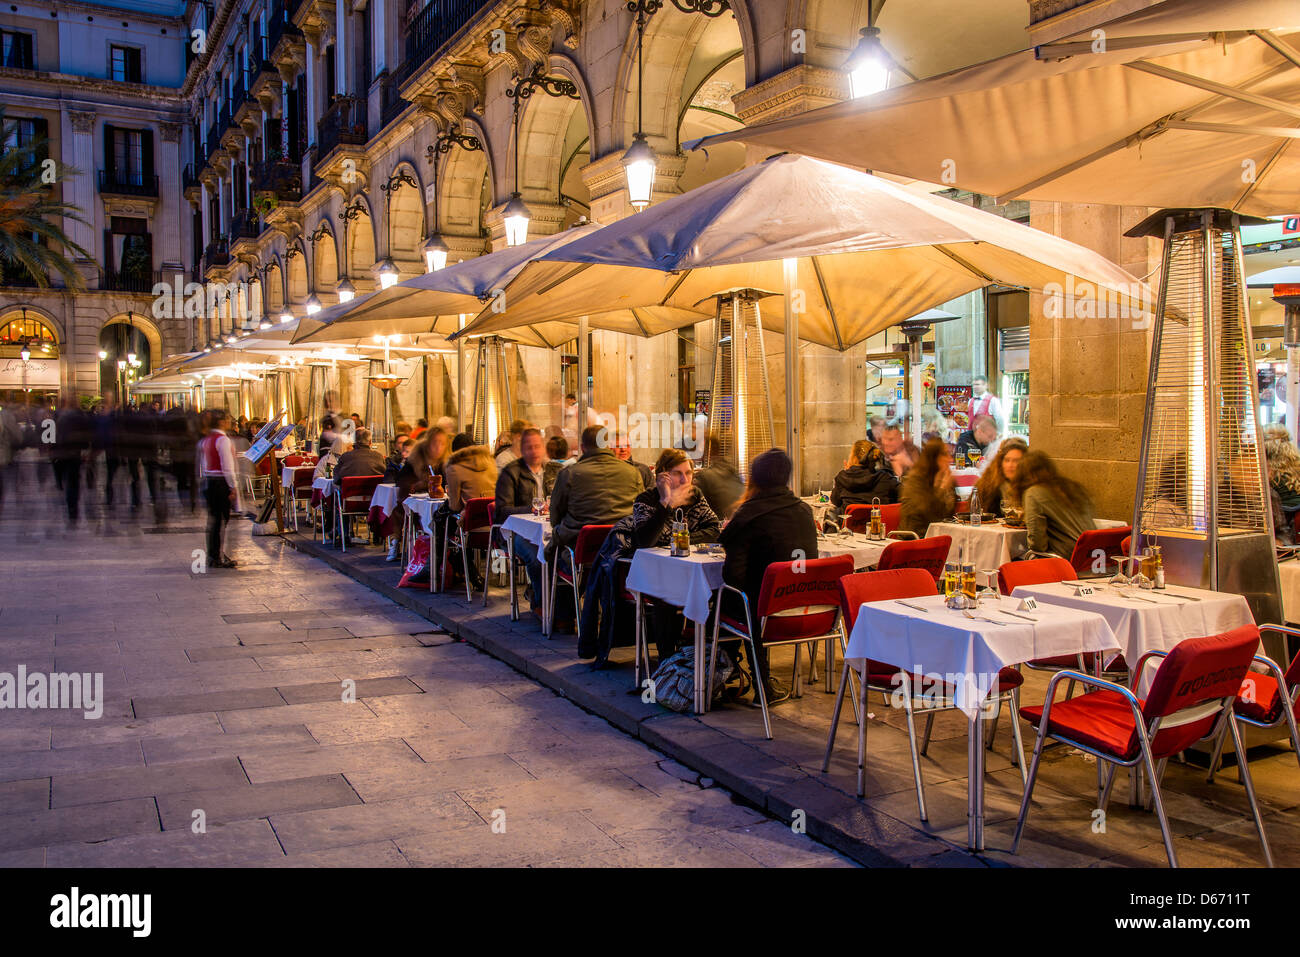 Night view of an outdoor restaurant cafe with people seated at tables, Plaça Reial  or Plaza Real, Barcelona, Catalonia, Spain Stock Photo